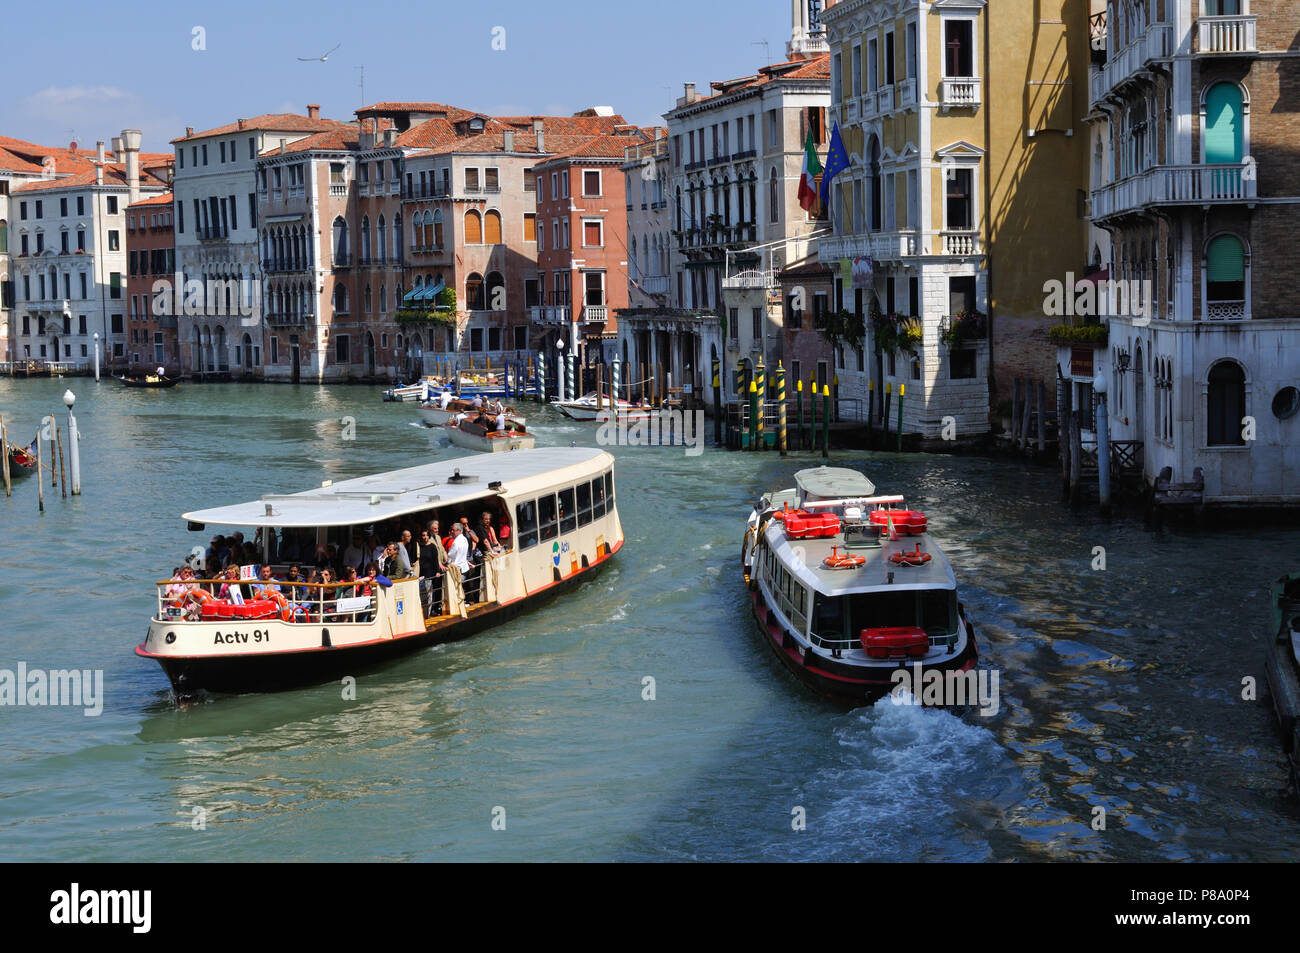 Water buses, or vaporetti, passing on the Grand Canal in Venice Stock Photo